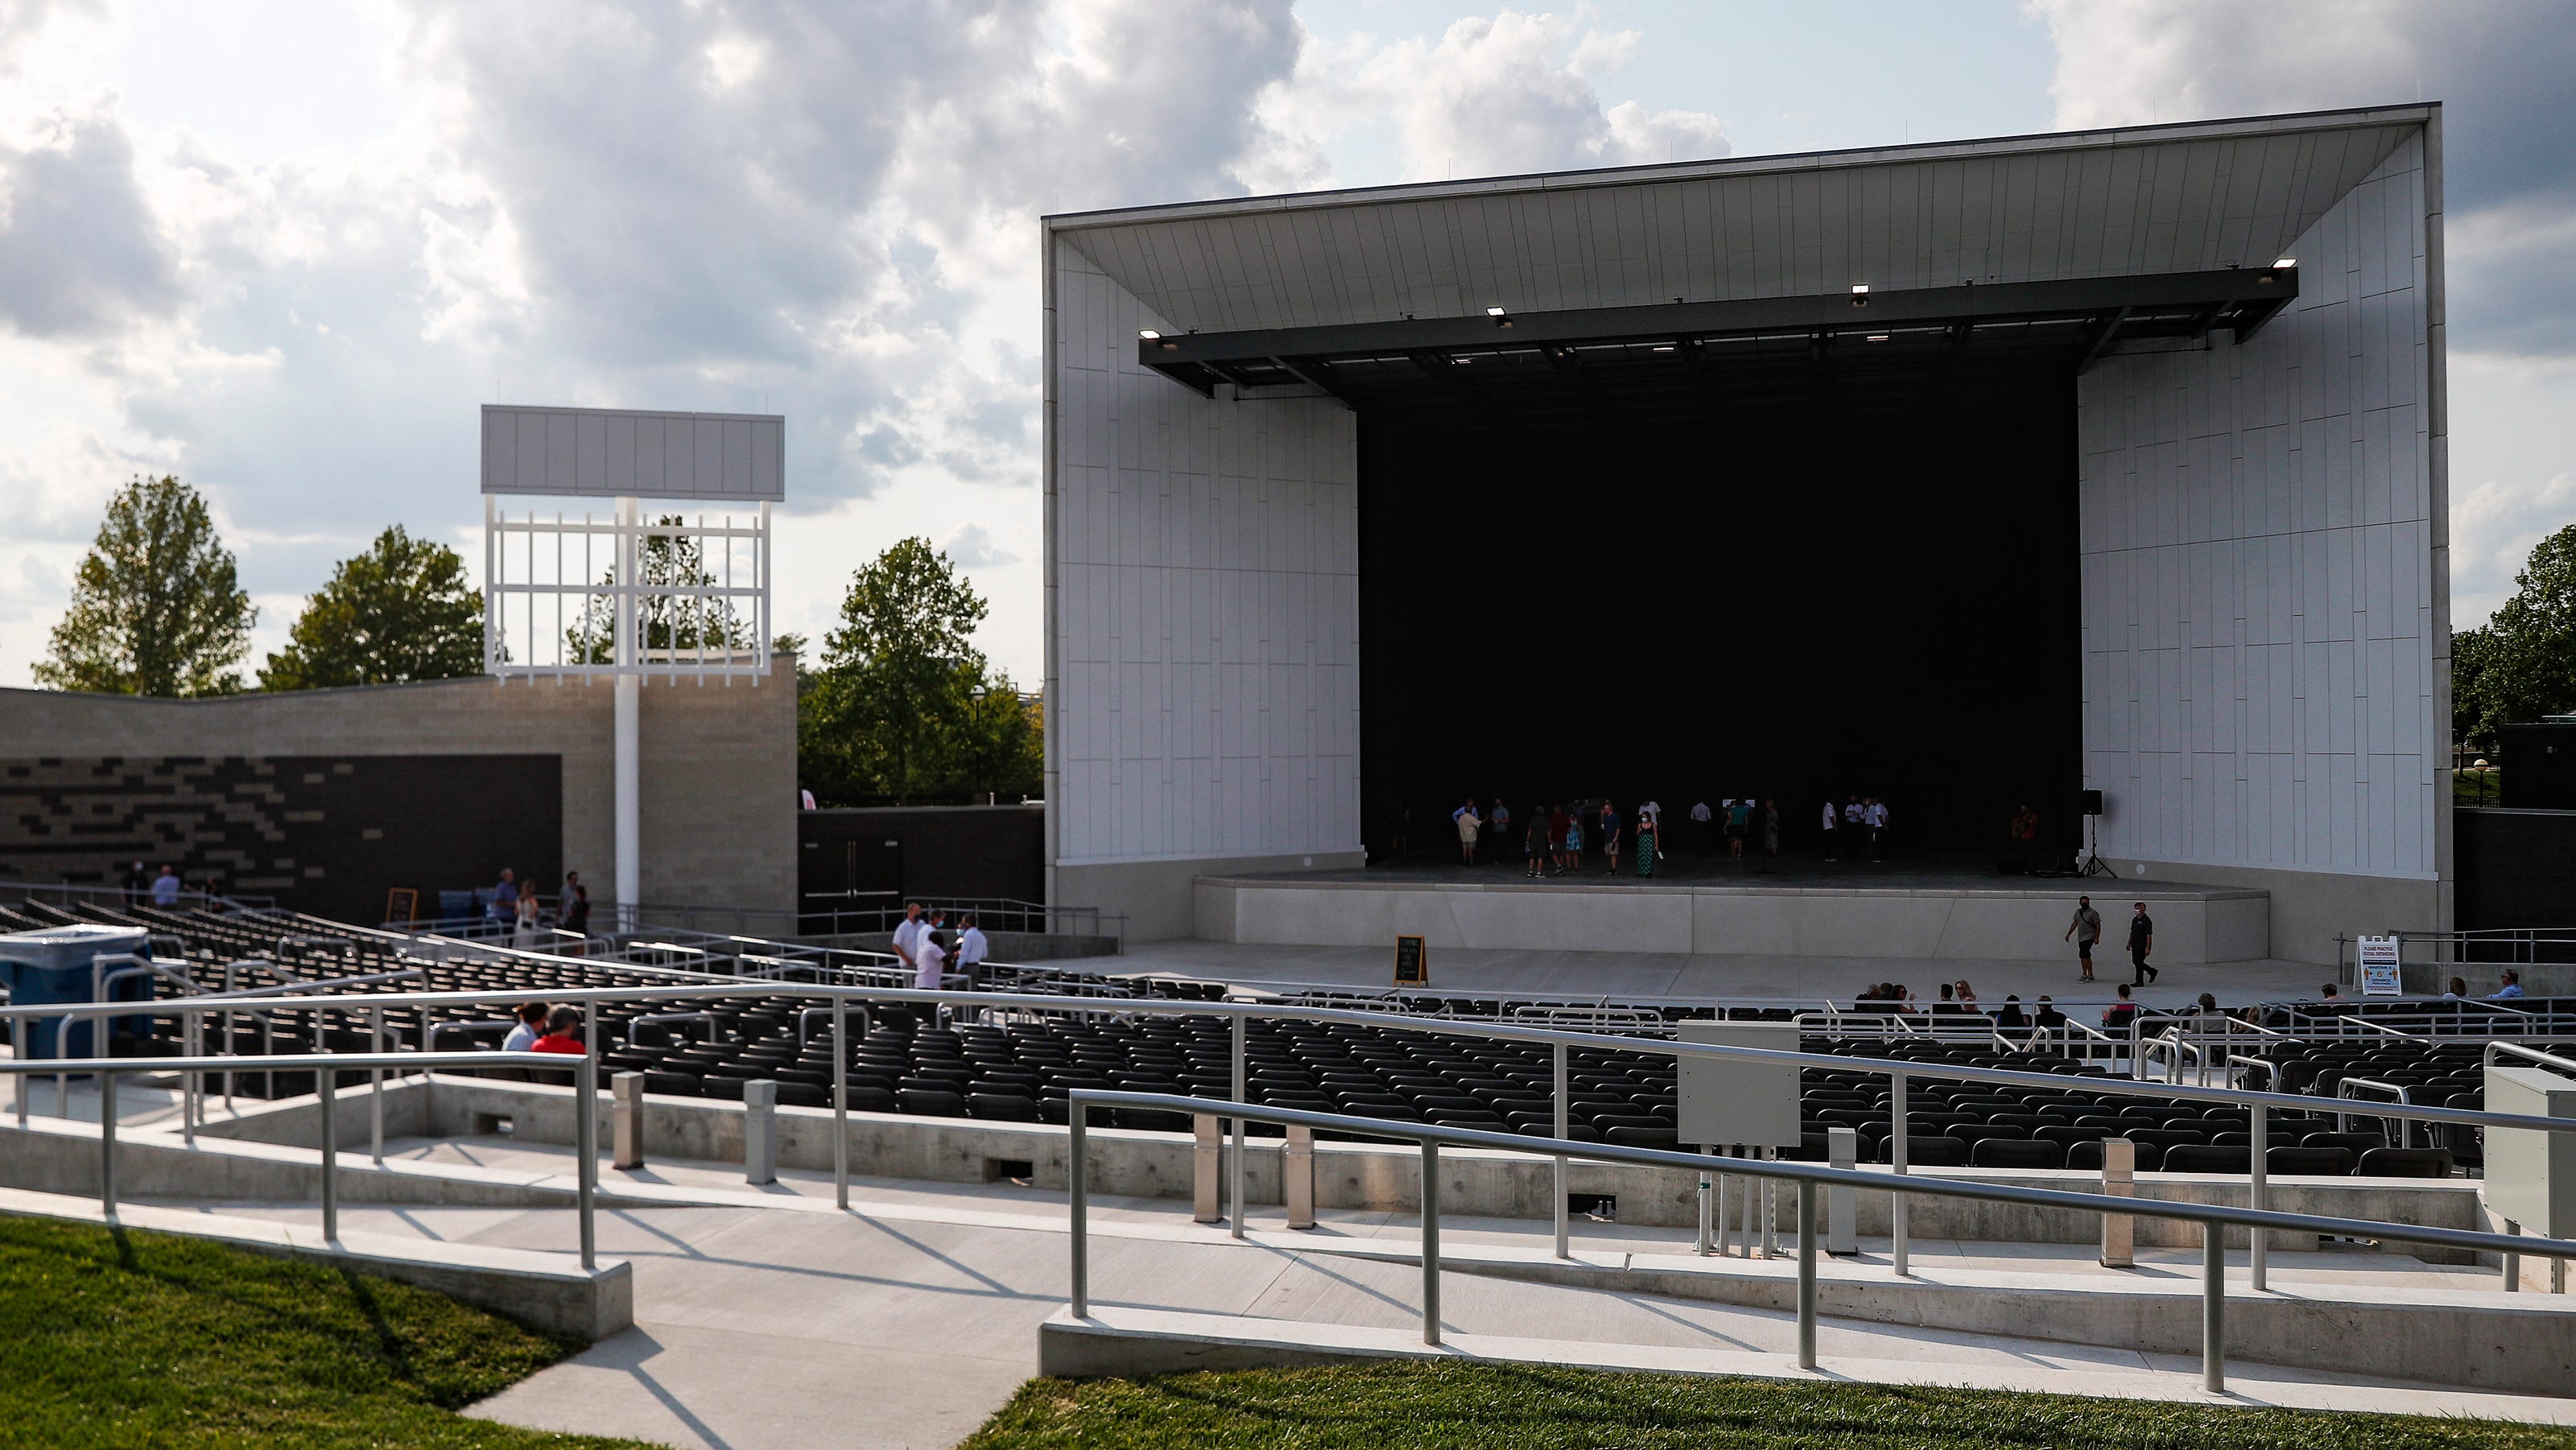 White River State Park revamped venue to host its first public concert